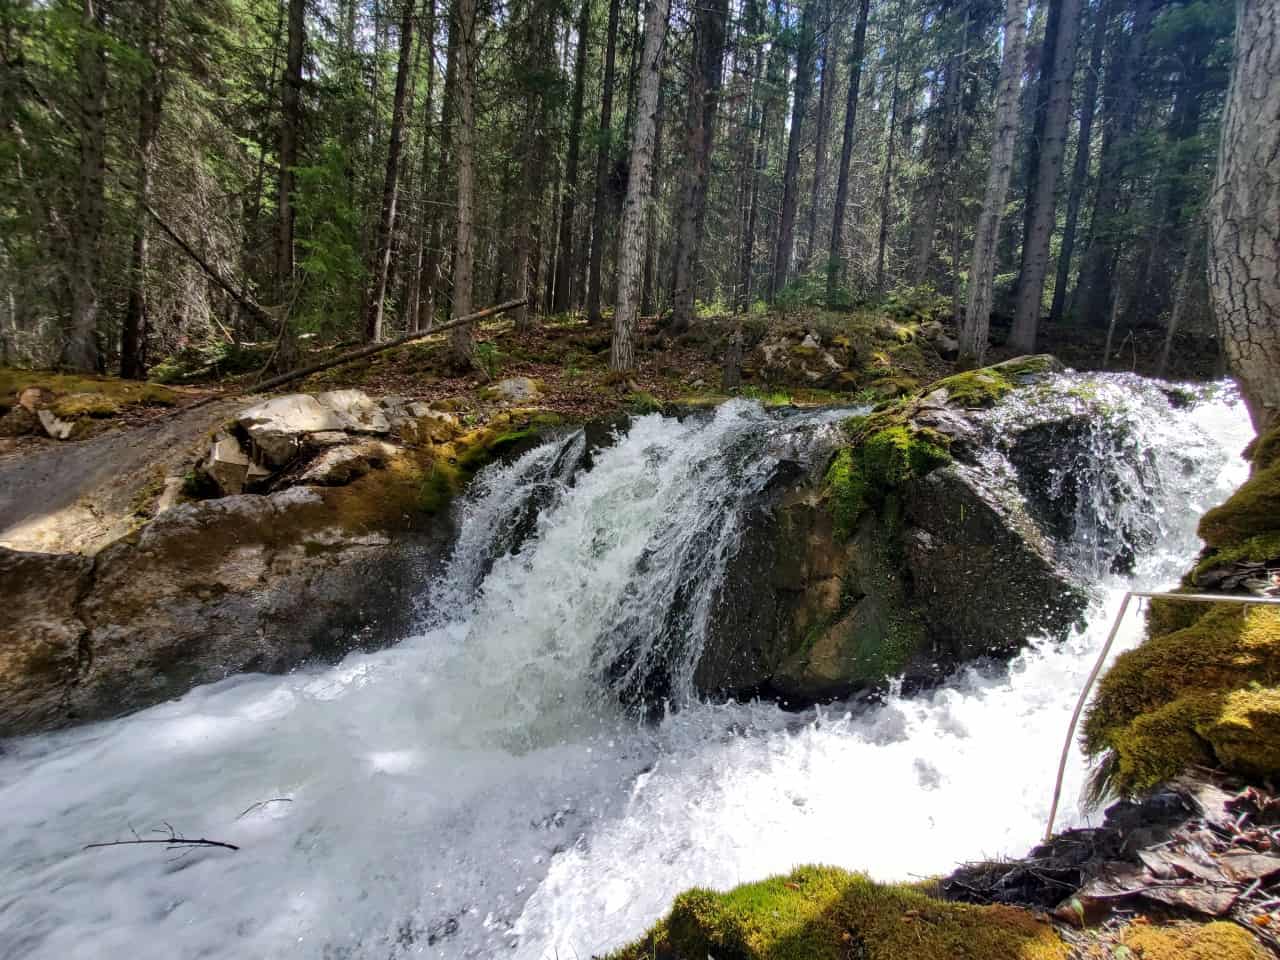 Spring Flow Crowsnest Creek Falls  - Late May and early June are the best times to view waterfalls in Alberta Canada with the snow melting in the mountains and spring runoff happens 